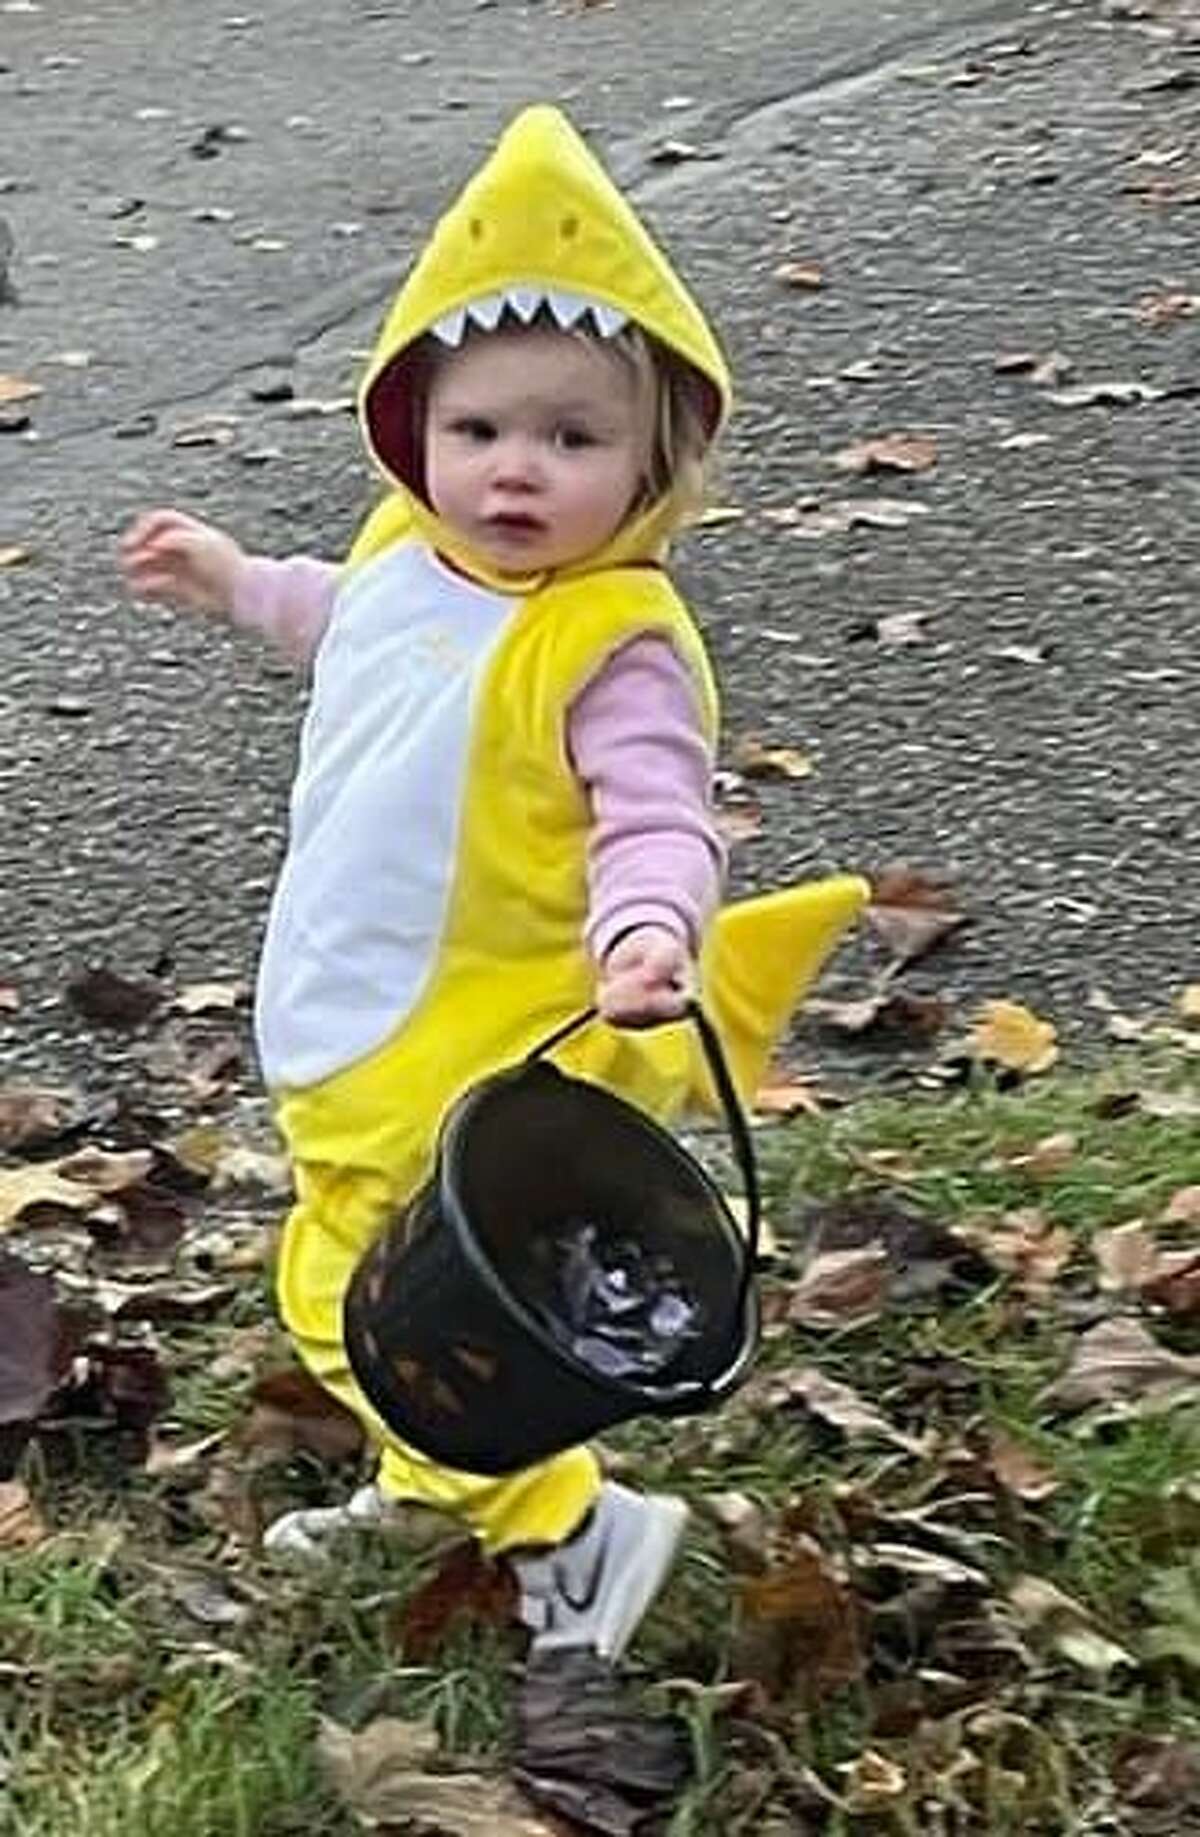 Autumn Myers is ready for a candy feeding frenzy.